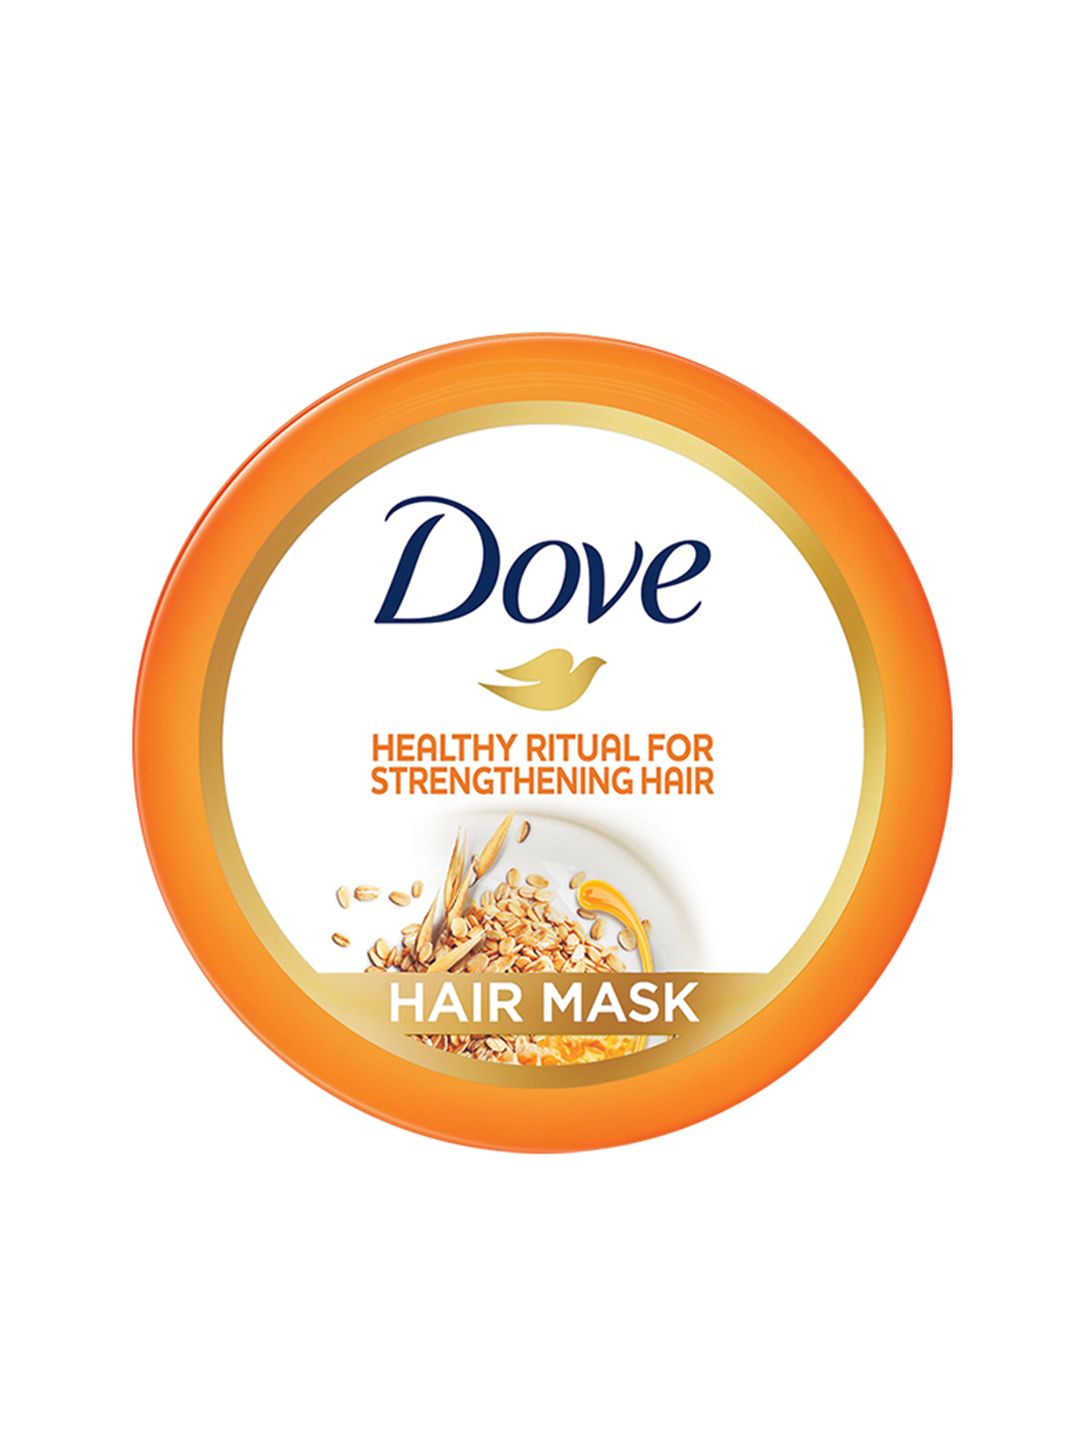 Dove Healthy Ritual for Strengthening Hair Mask with Oat Milk & Honey 300 ml Price in India